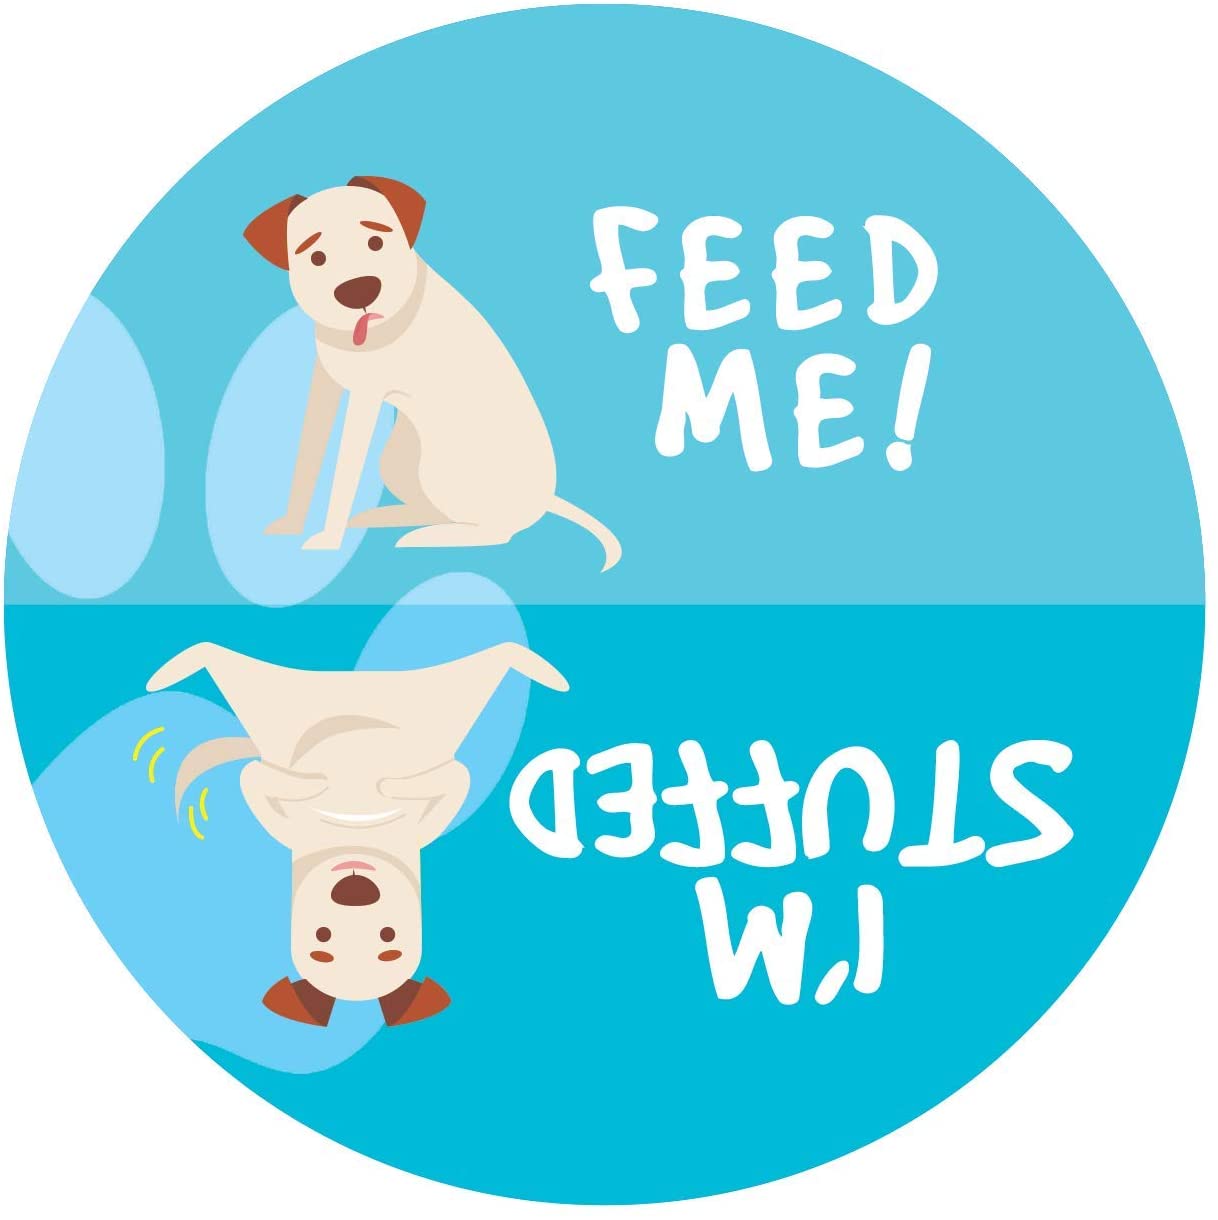 Declare Gifts Hungry Dog Refrigerator Magnet - Feed The Dog Indicator/Reminder Magnet